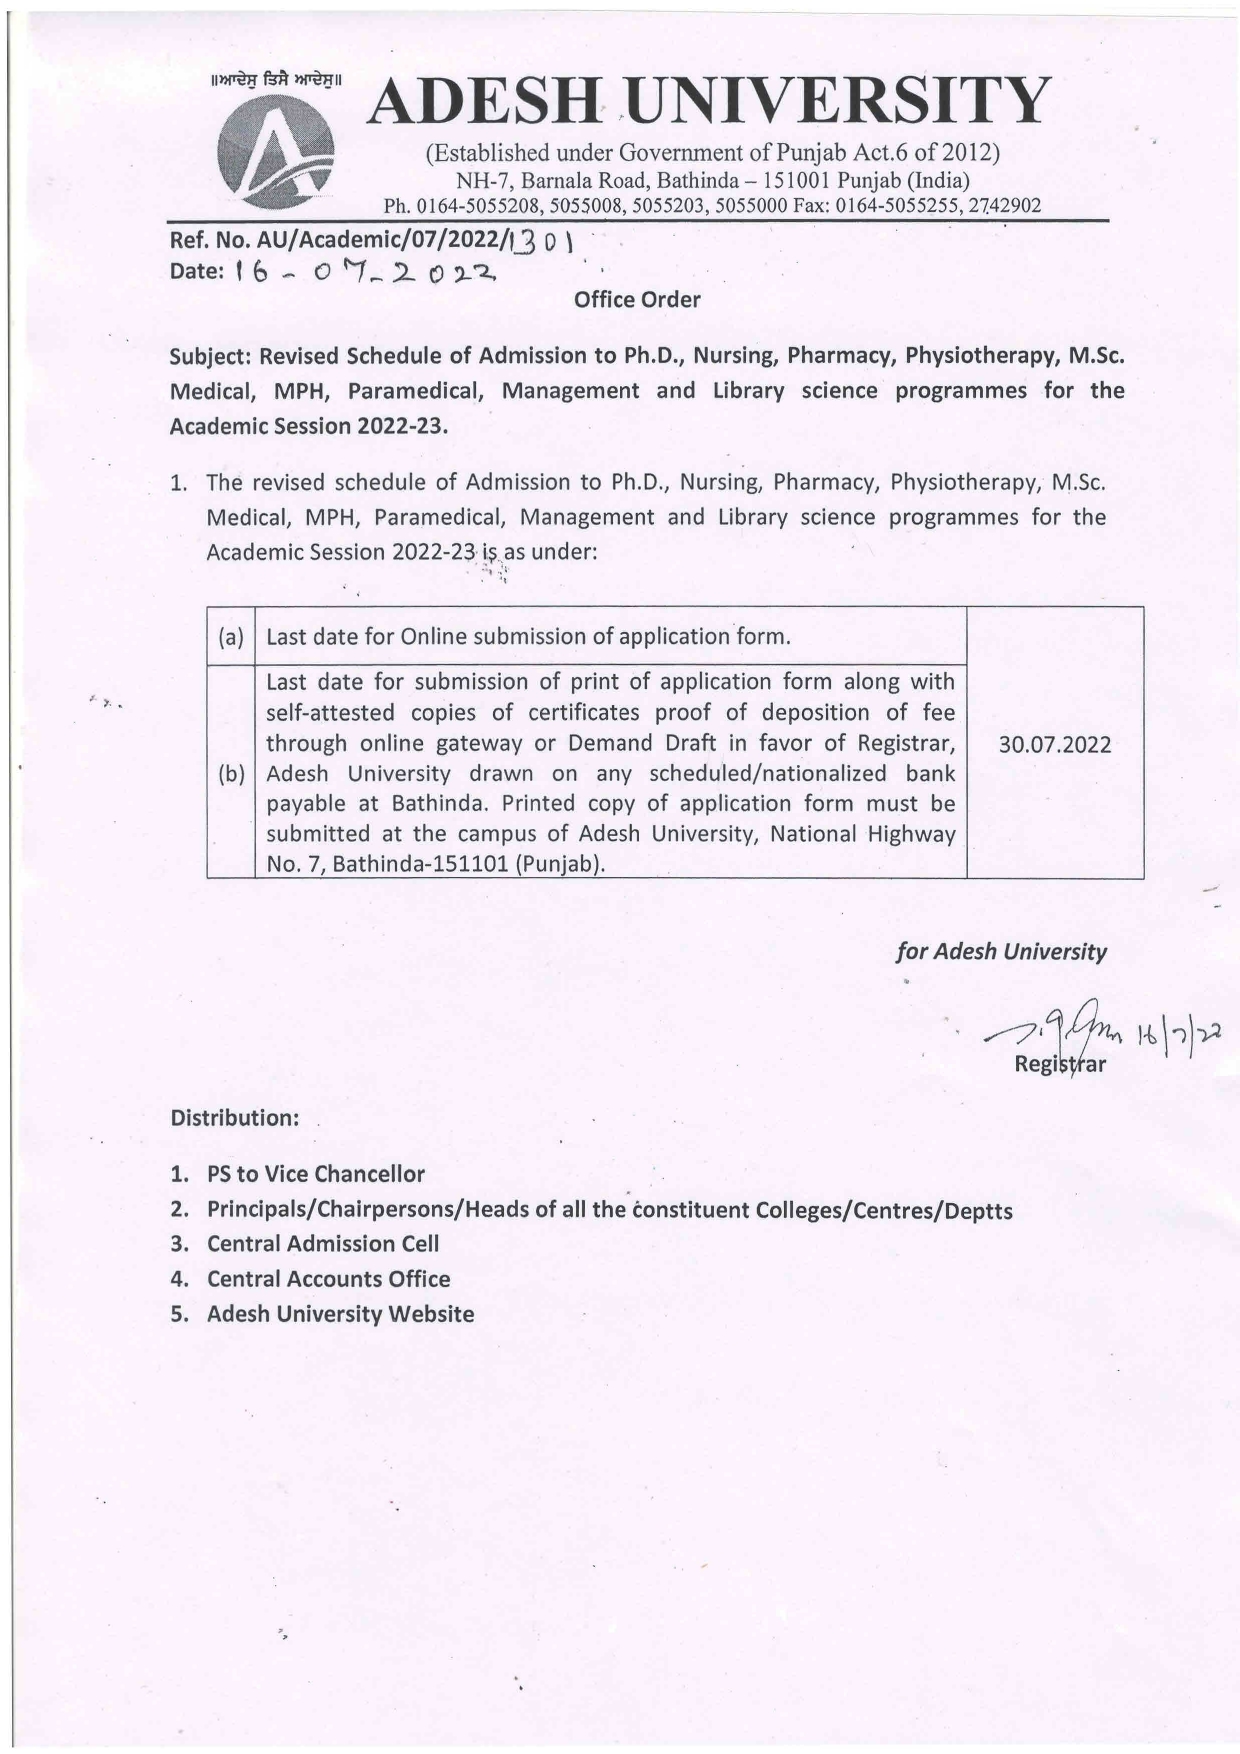 Revised Schedule of Admission to Ph.D., Nursing, Pharmacy, Physiotherapy, M.Sc. Medical, MPH, Paramedical, Management and Library science                              programmes for the Academic Session 2022-23